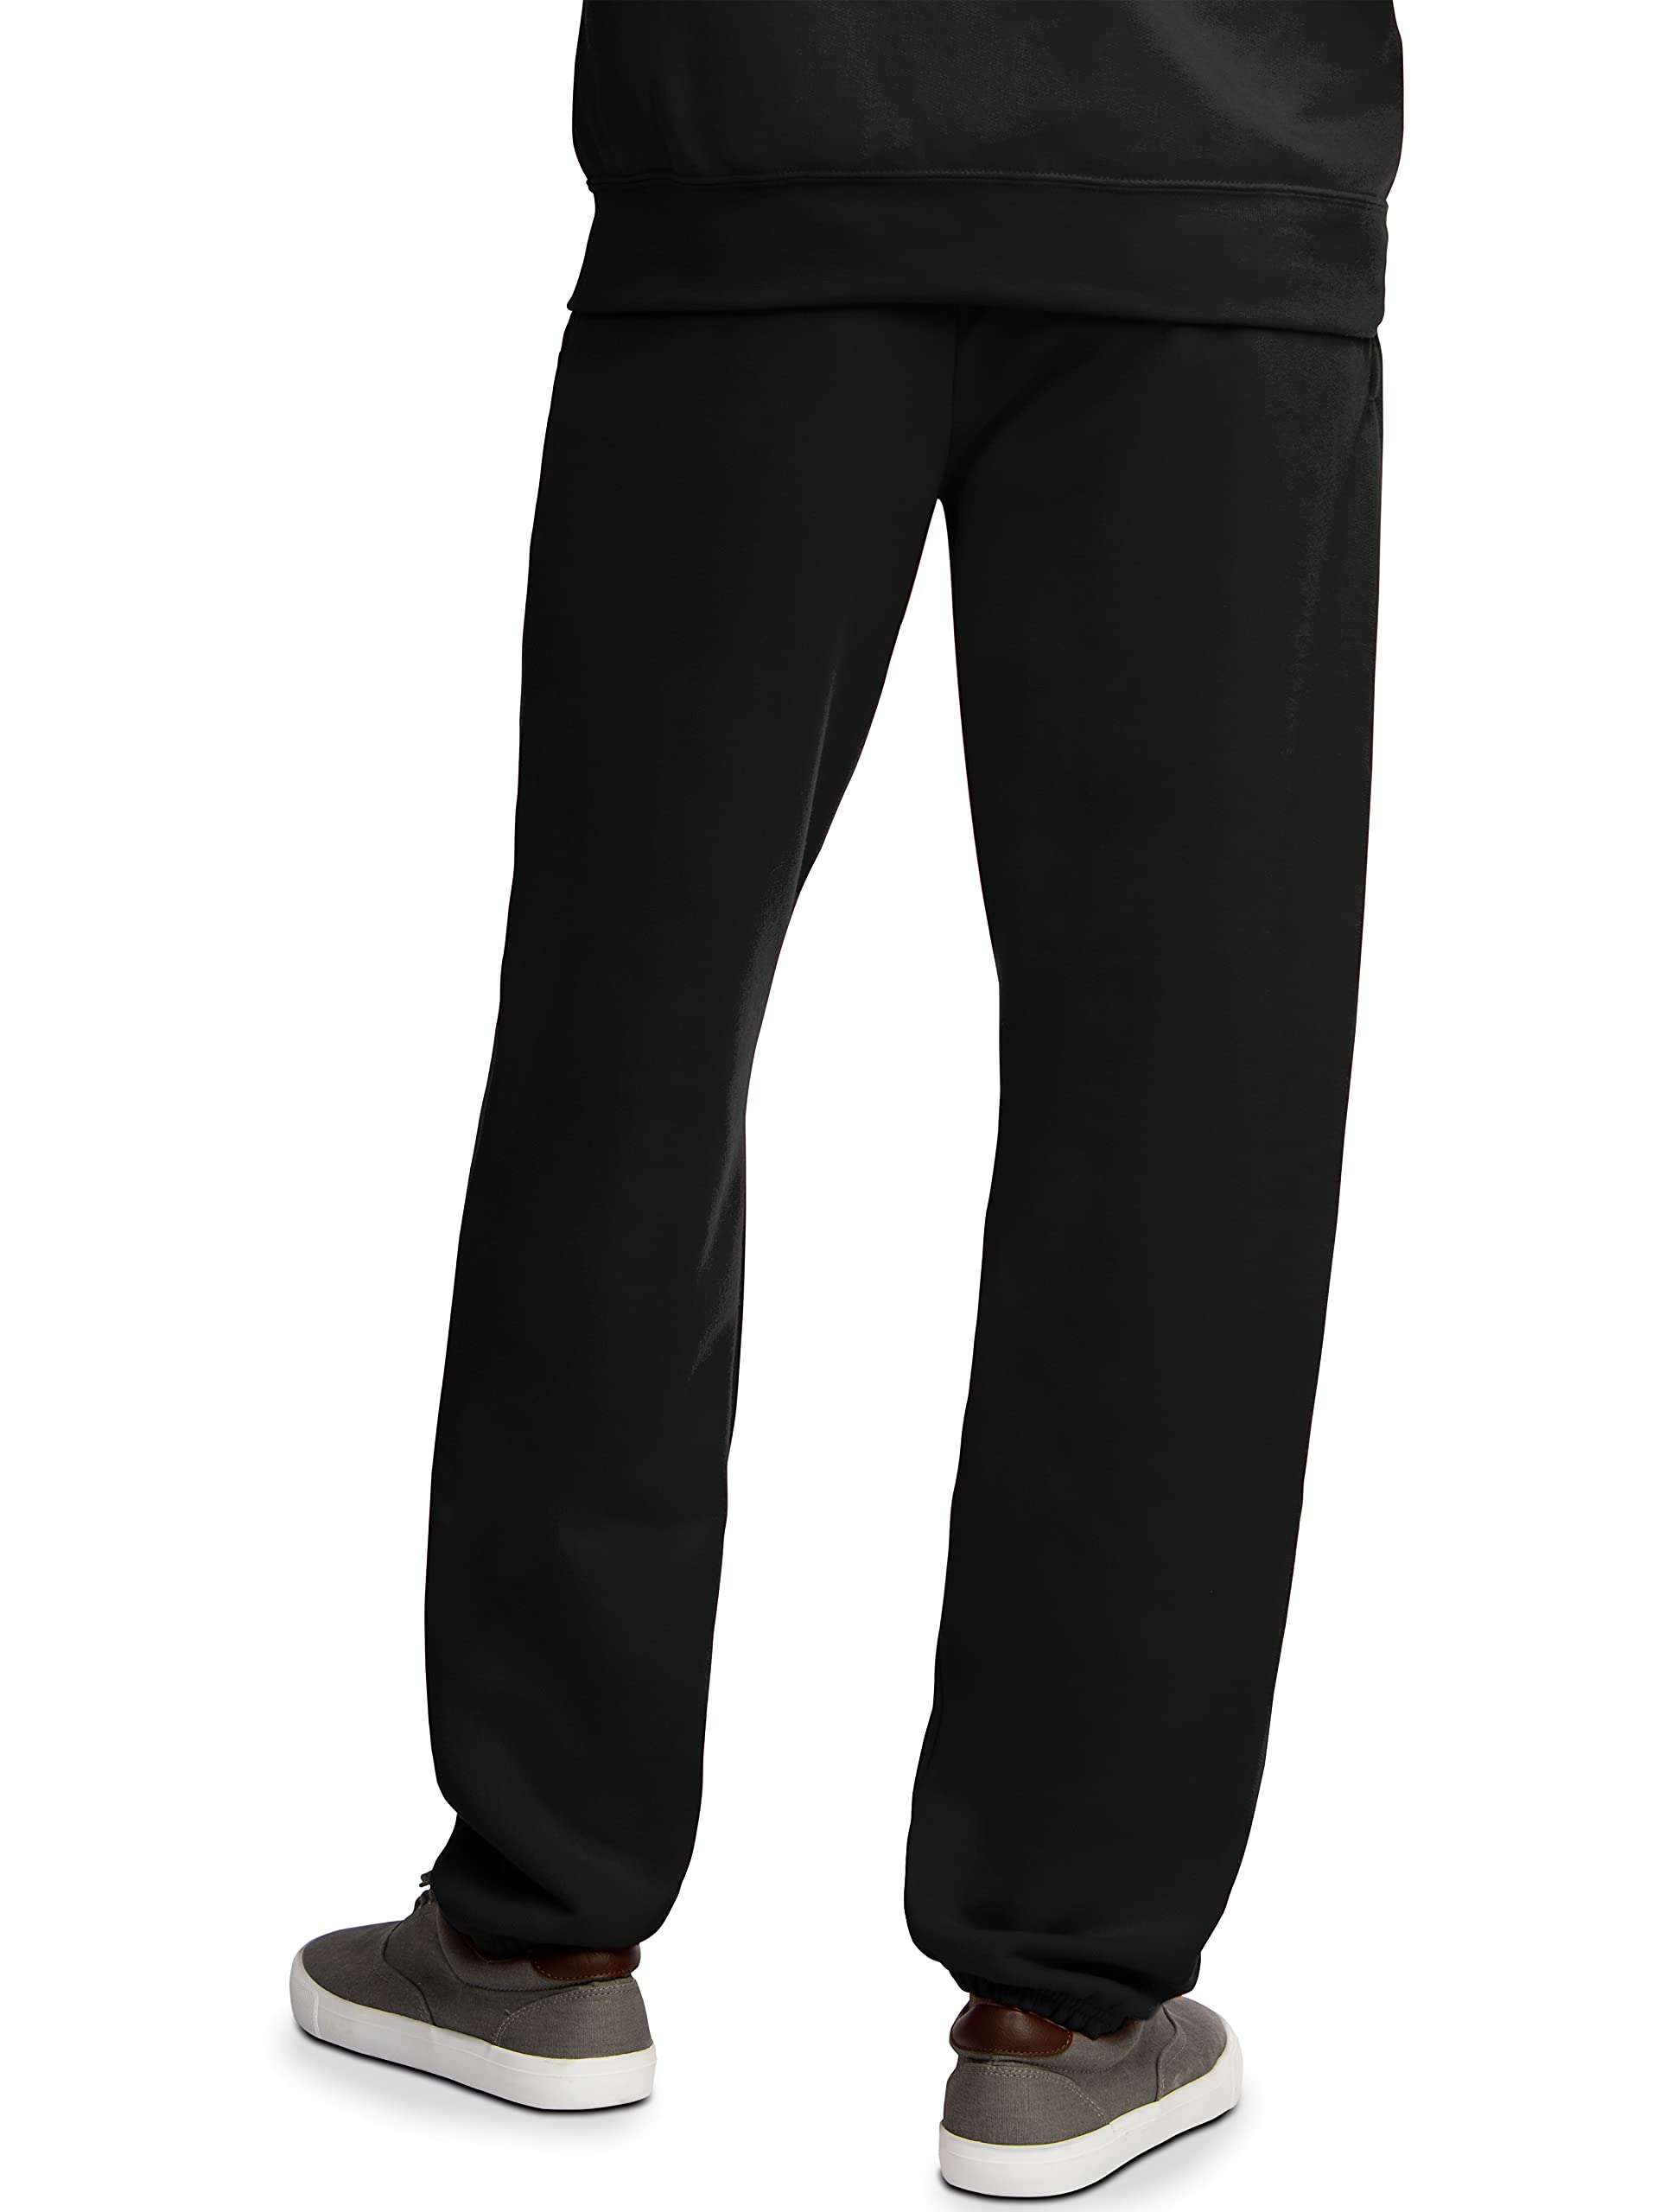 Fruit of the Loom Eversoft Fleece Sweatpants & Joggers with Pockets, Moisture Wicking & Breathable, Sizes S-4X